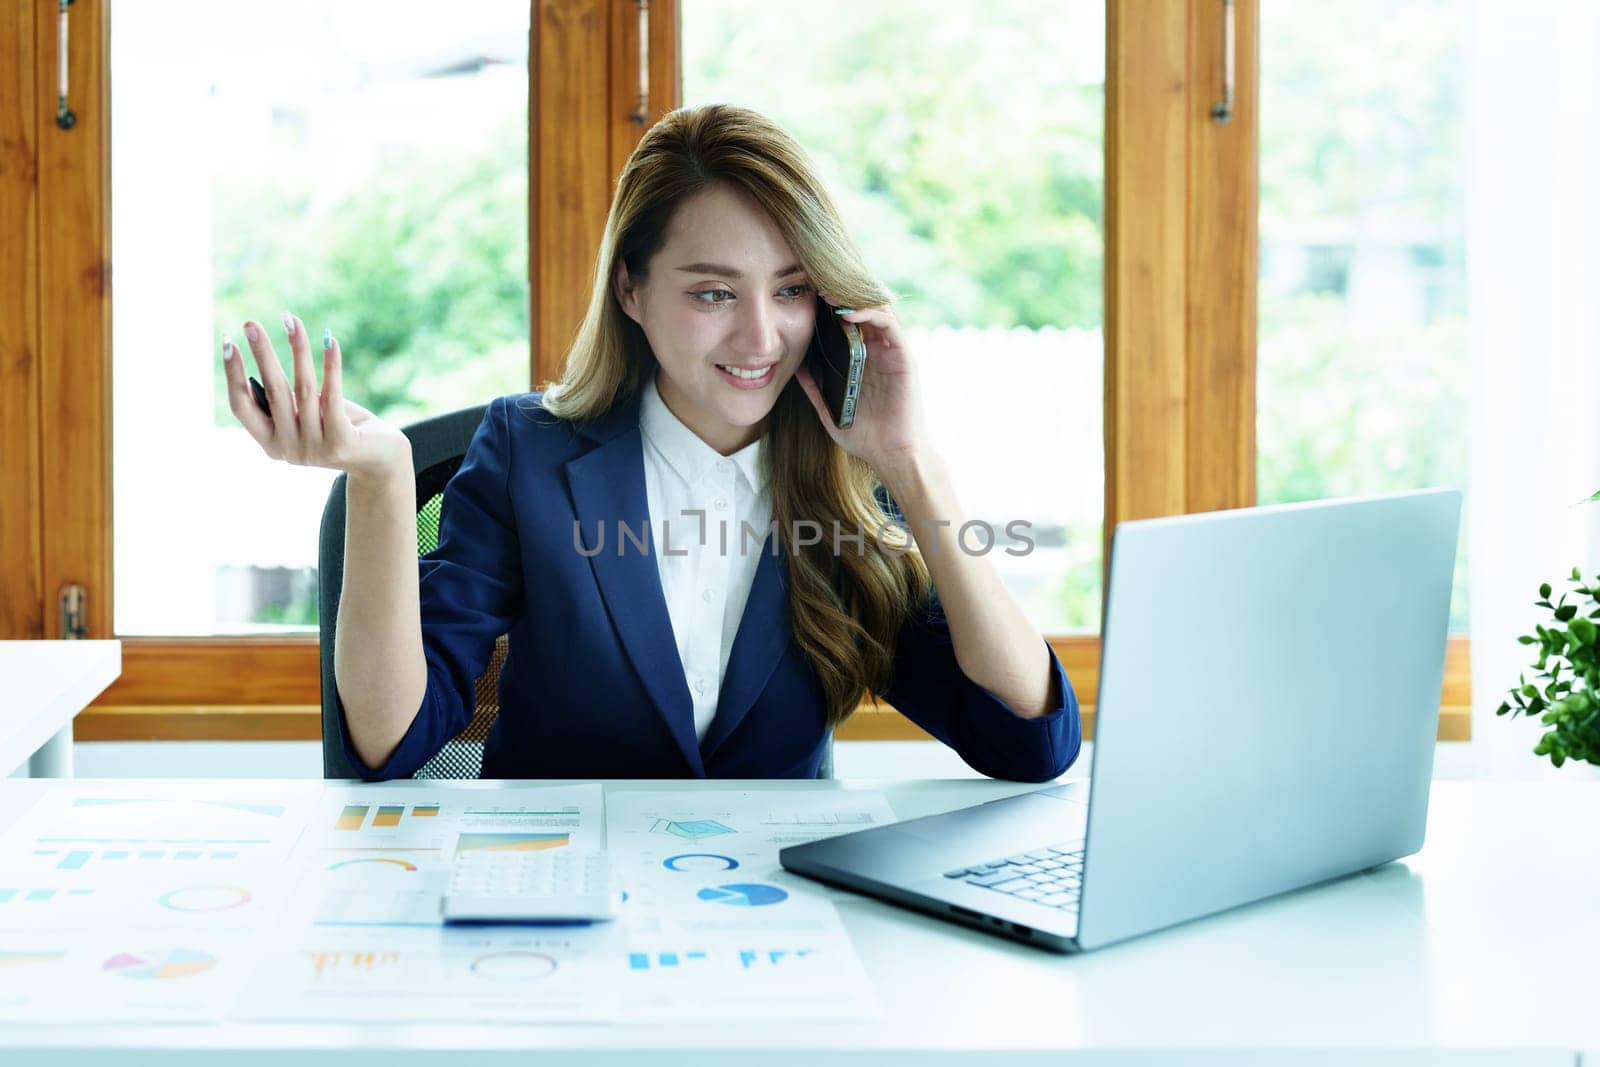 Portrait of a young Asian woman showing a smiling face as she uses her phone, computer and financial documents on her desk in the early morning hours.